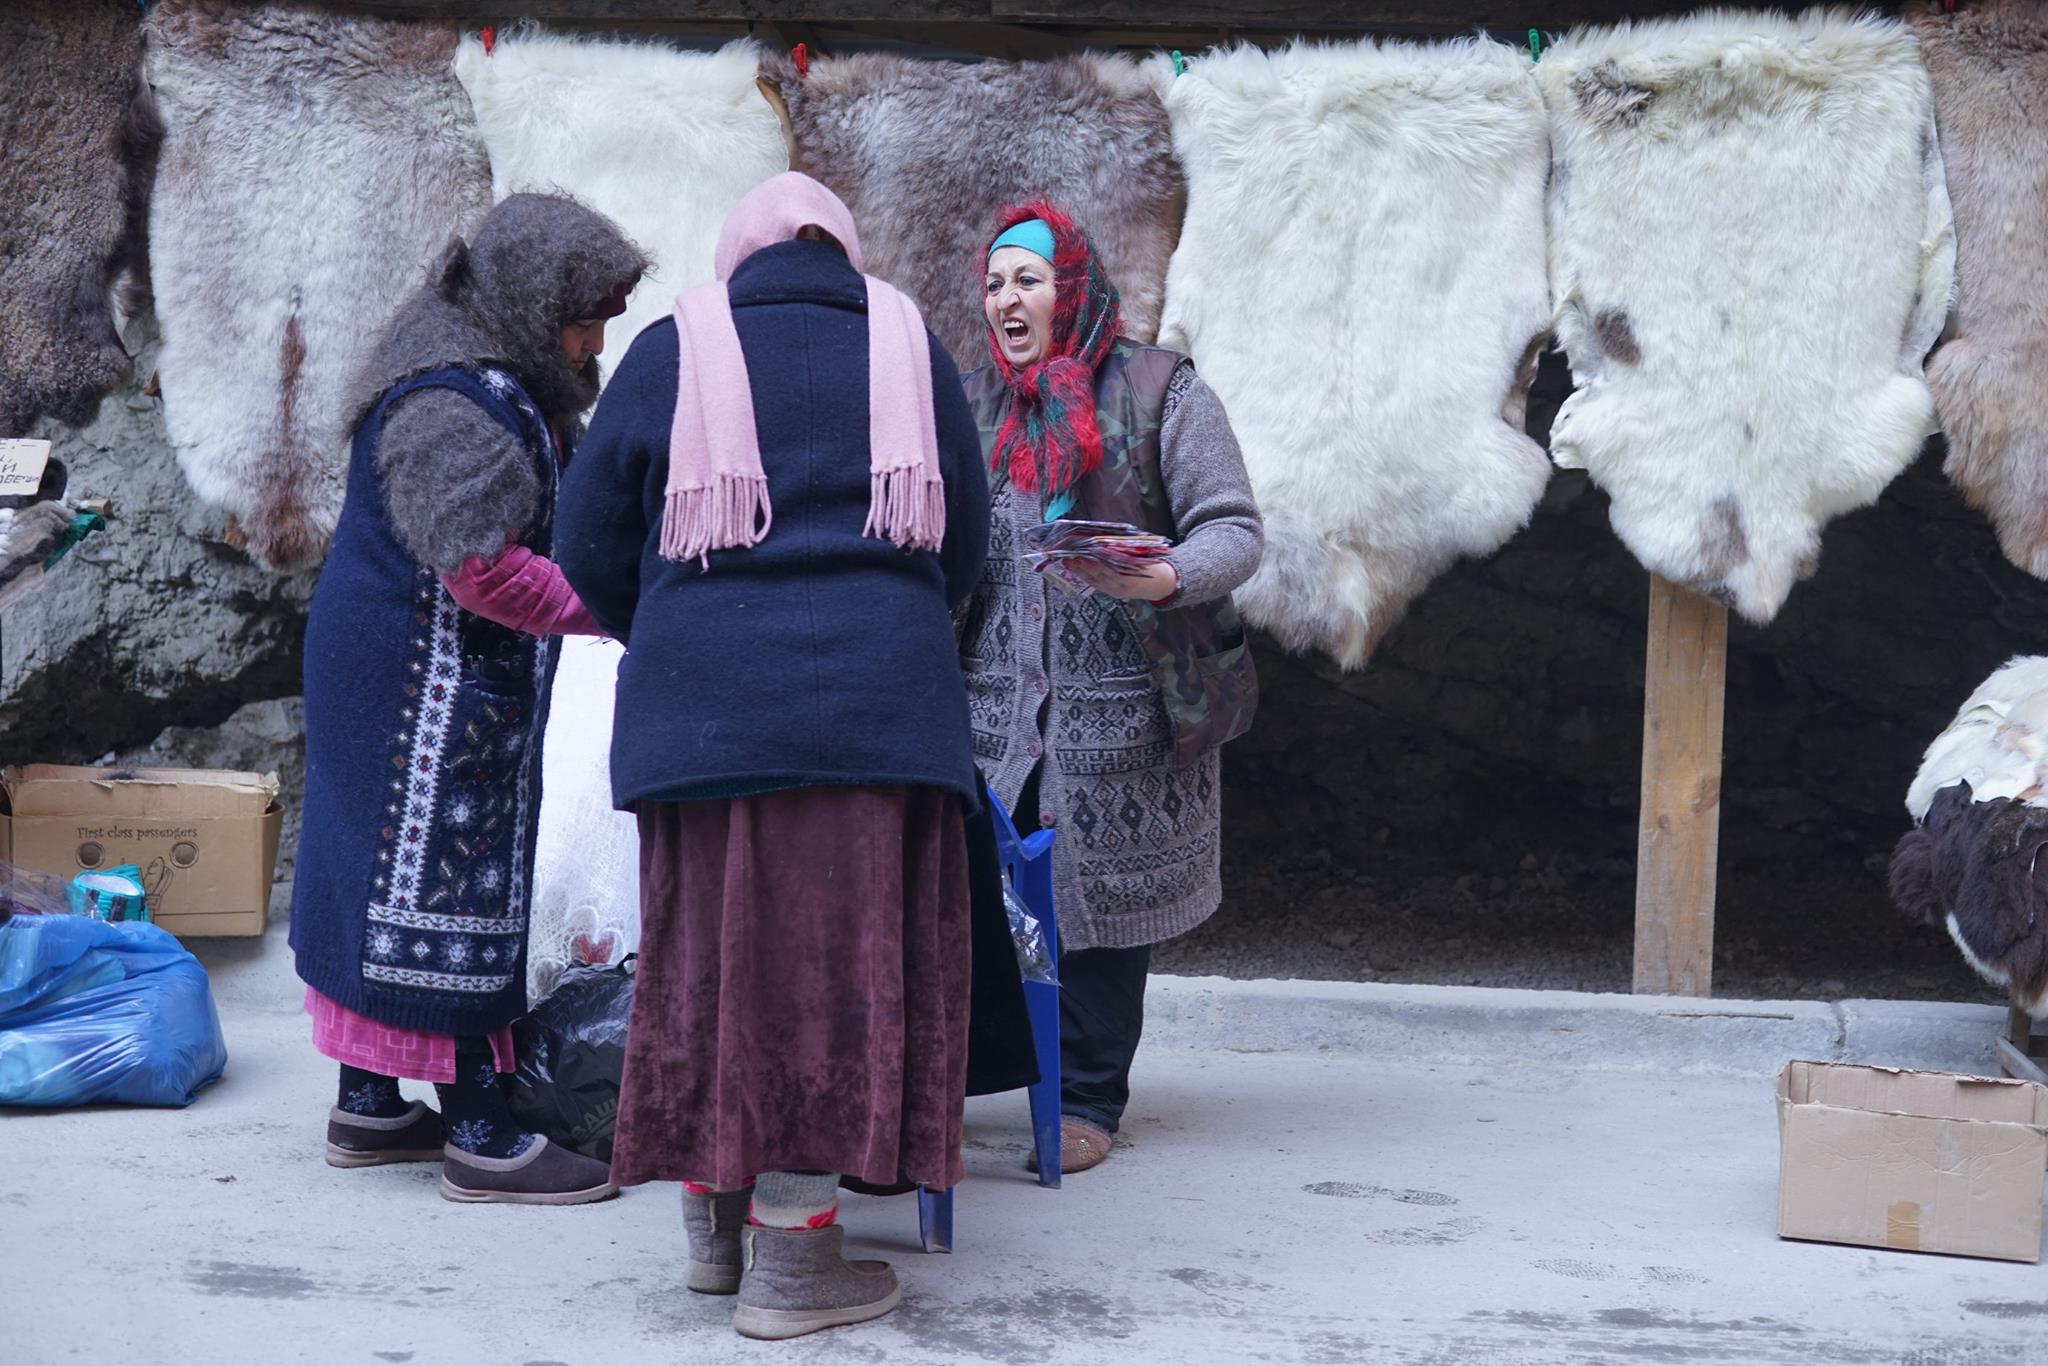 Women arguing at the market